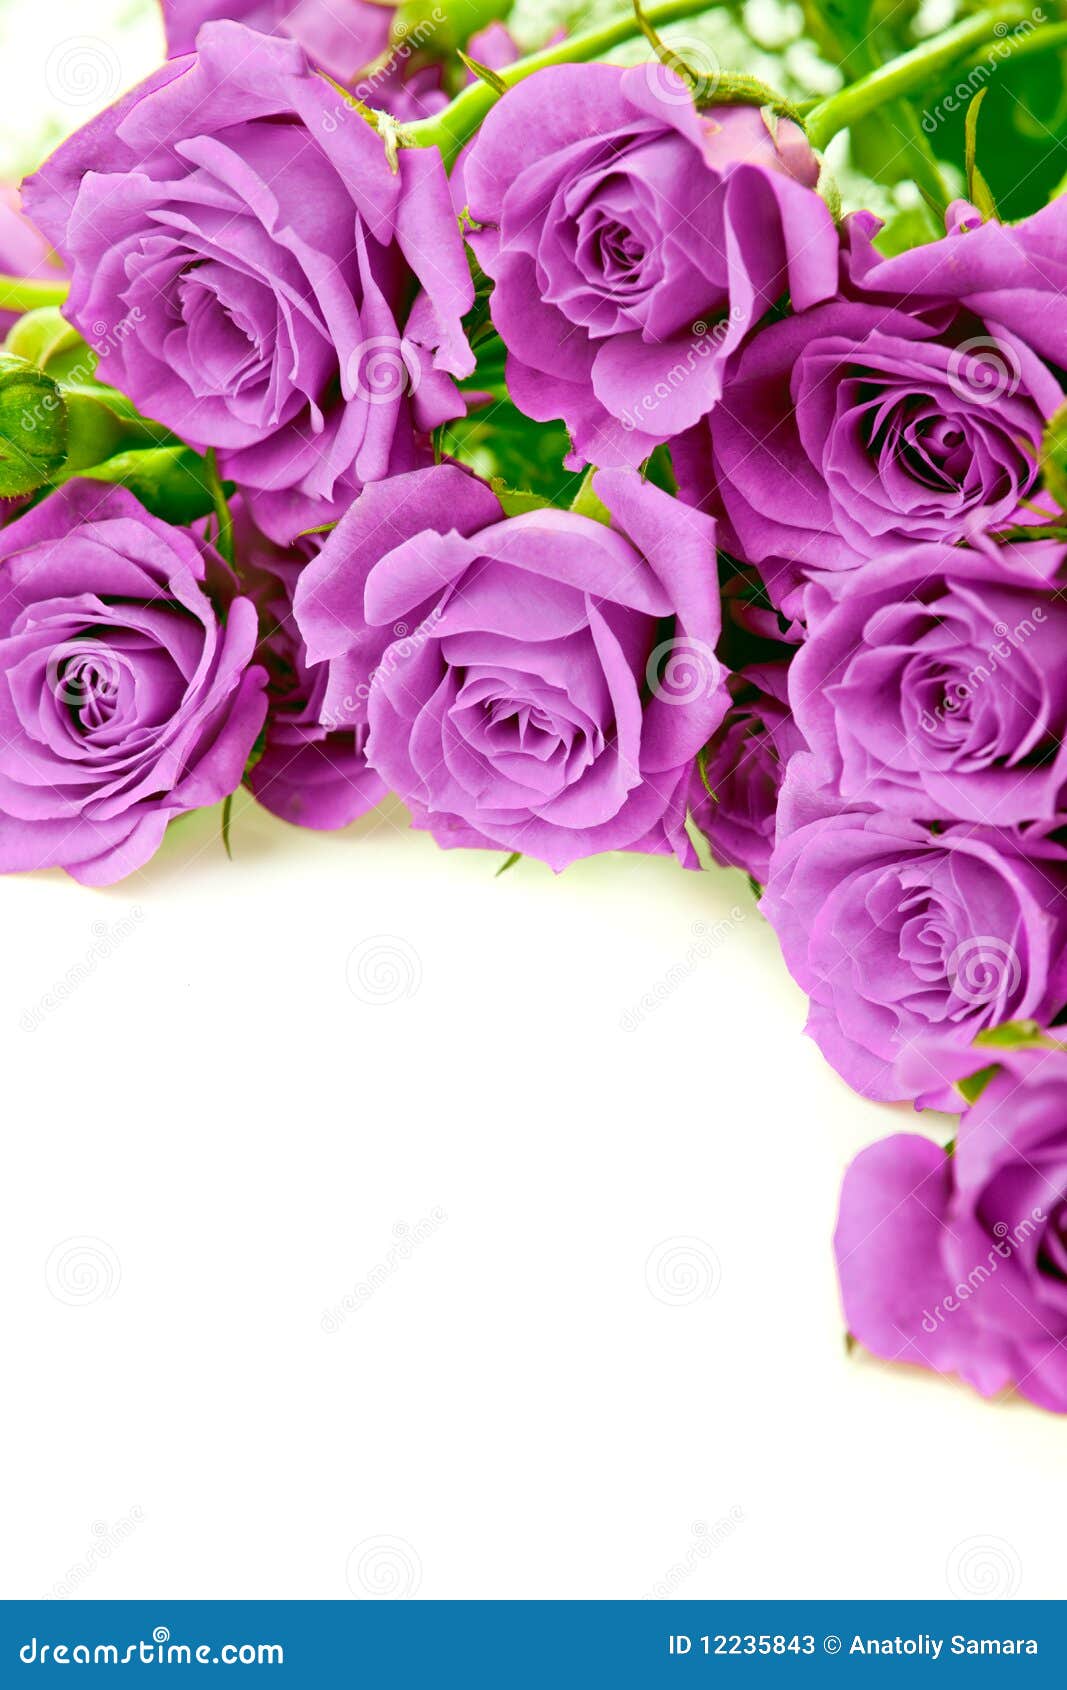 Purple roses stock image. Image of background, blossom 